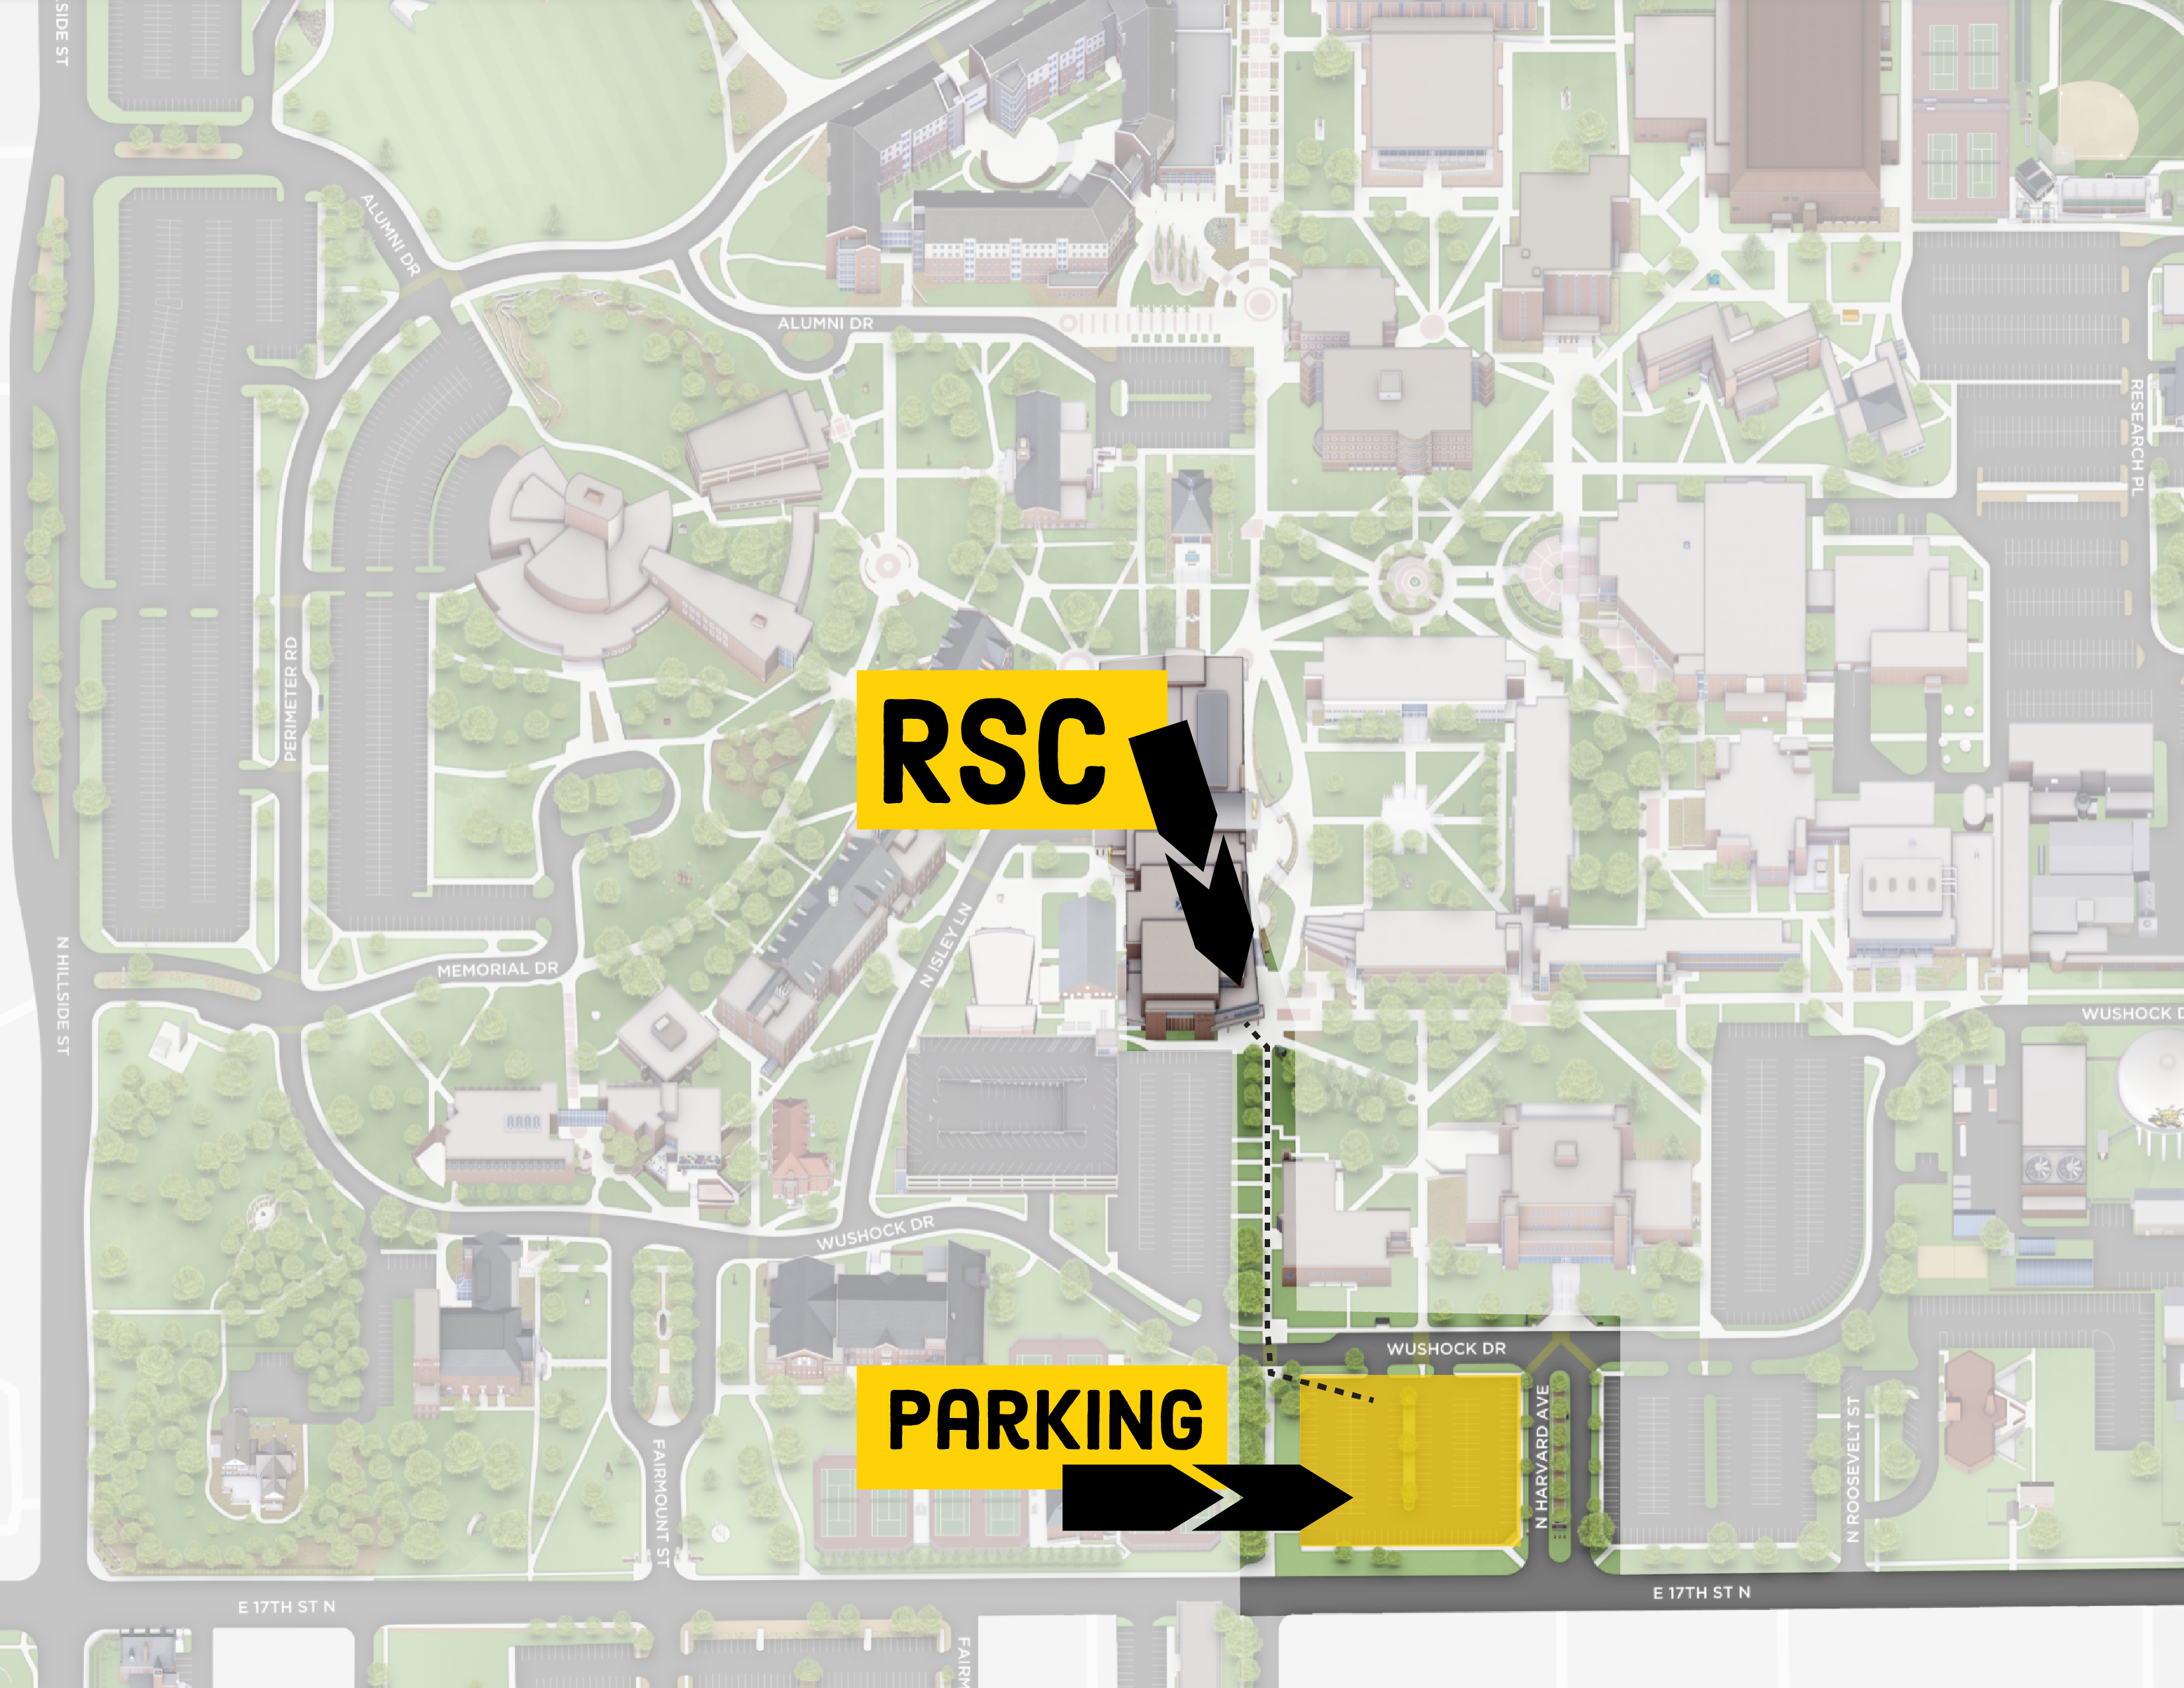 CHW Parking map of lot 9W with directions to the RSC